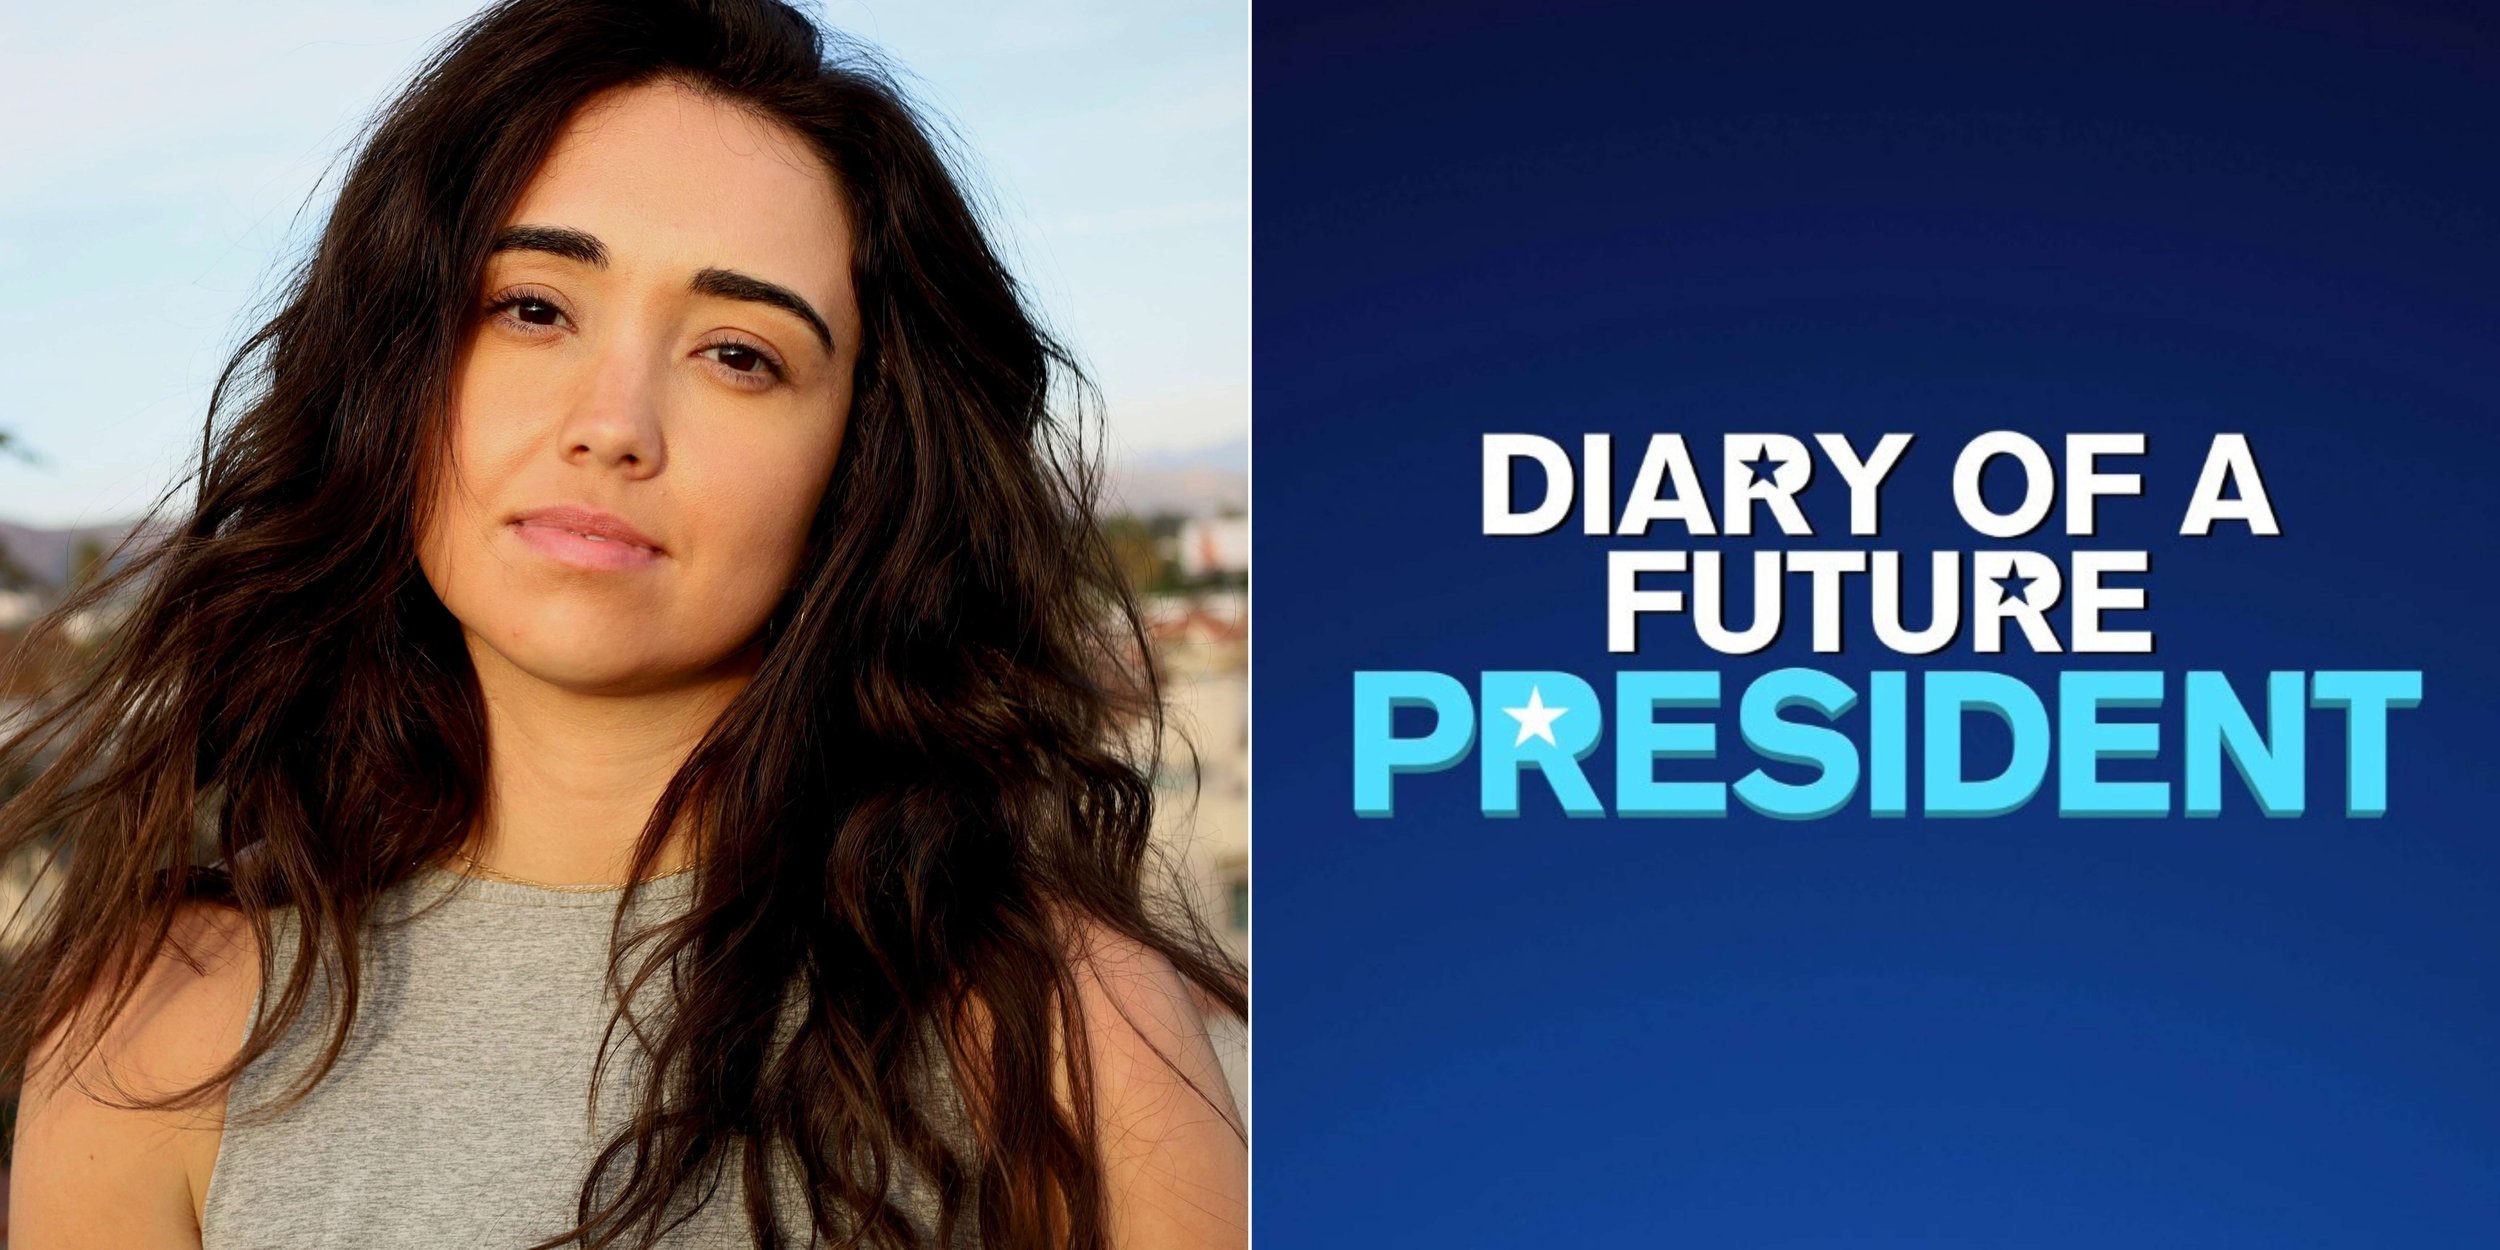  Cristina Cibrian was hired as a Showrunner’s Assistant on  Diary of a Future President .  